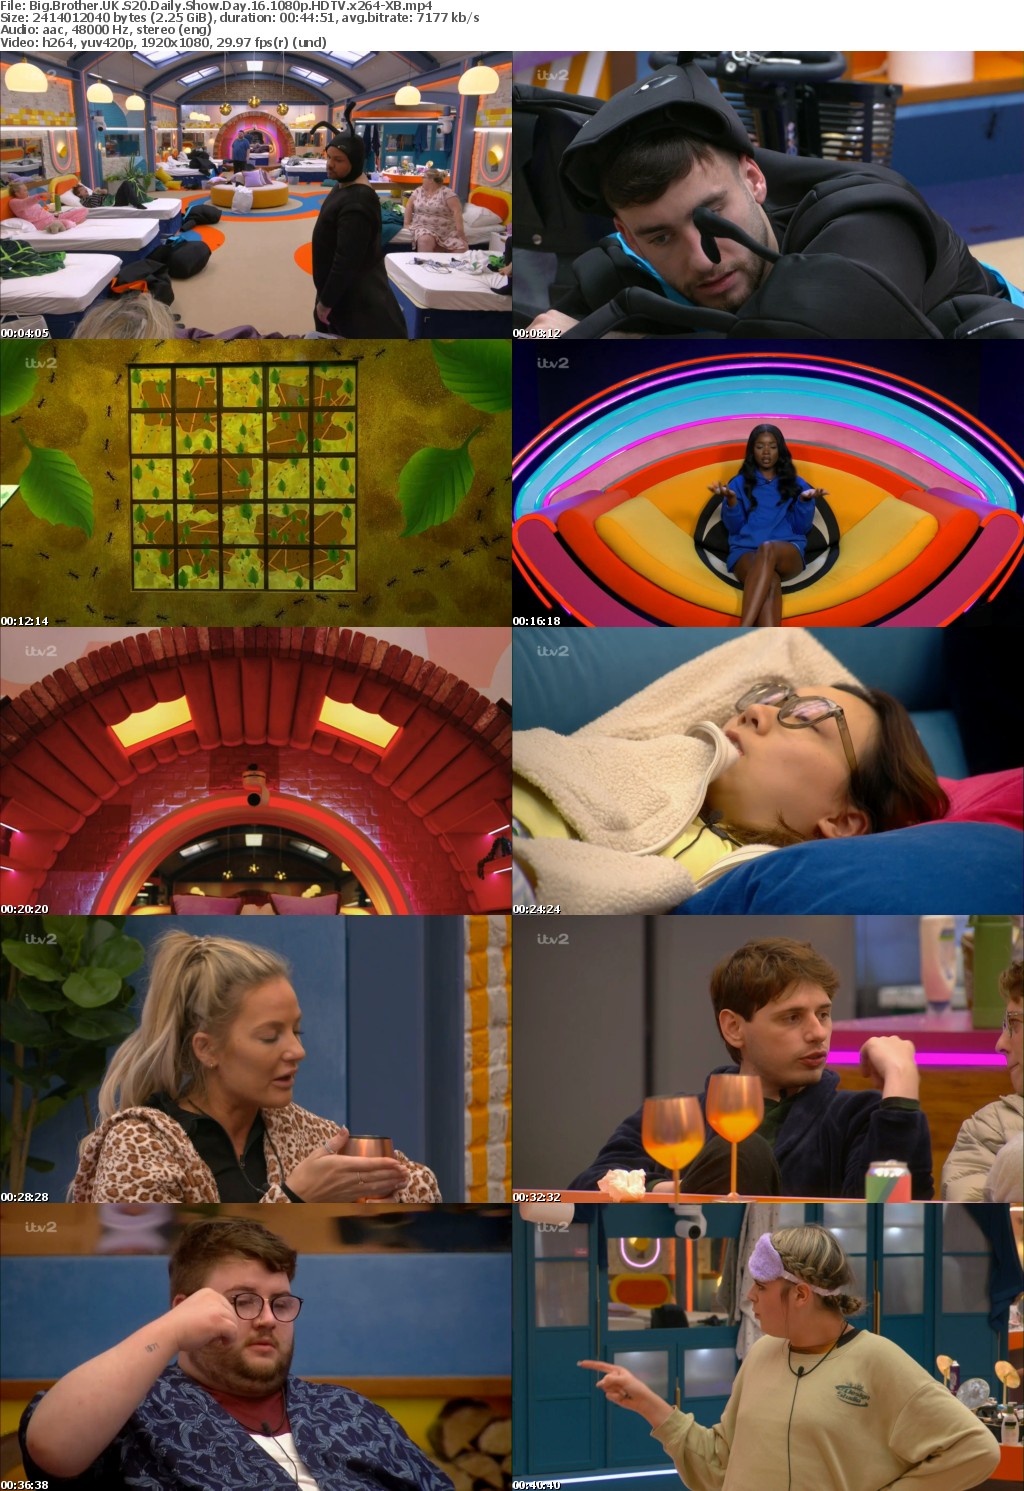 Big Brother UK S20 Daily Show Day 16 1080p HDTV x264-XB